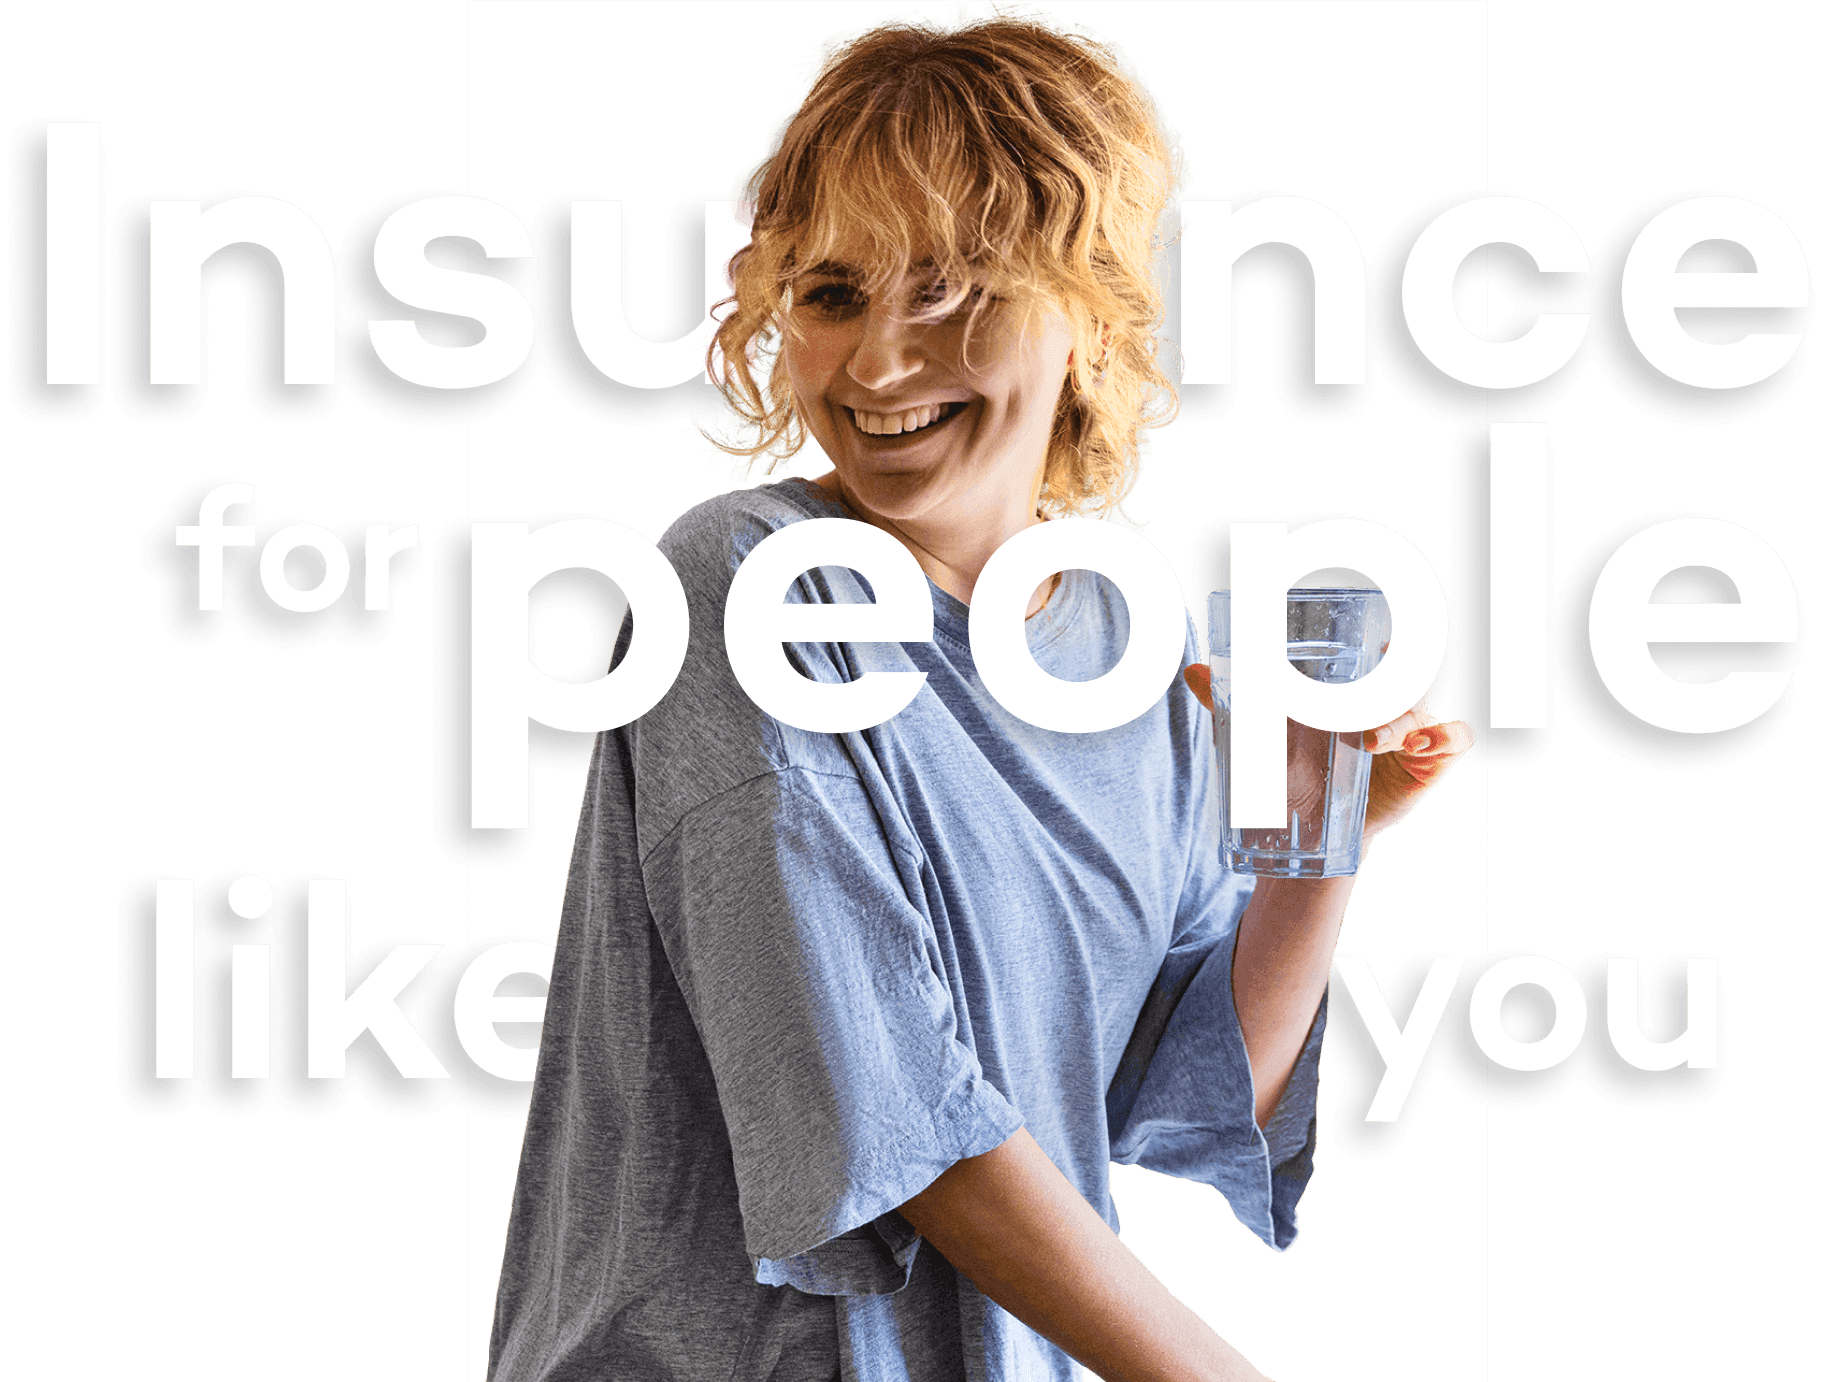 Insurance for people like you